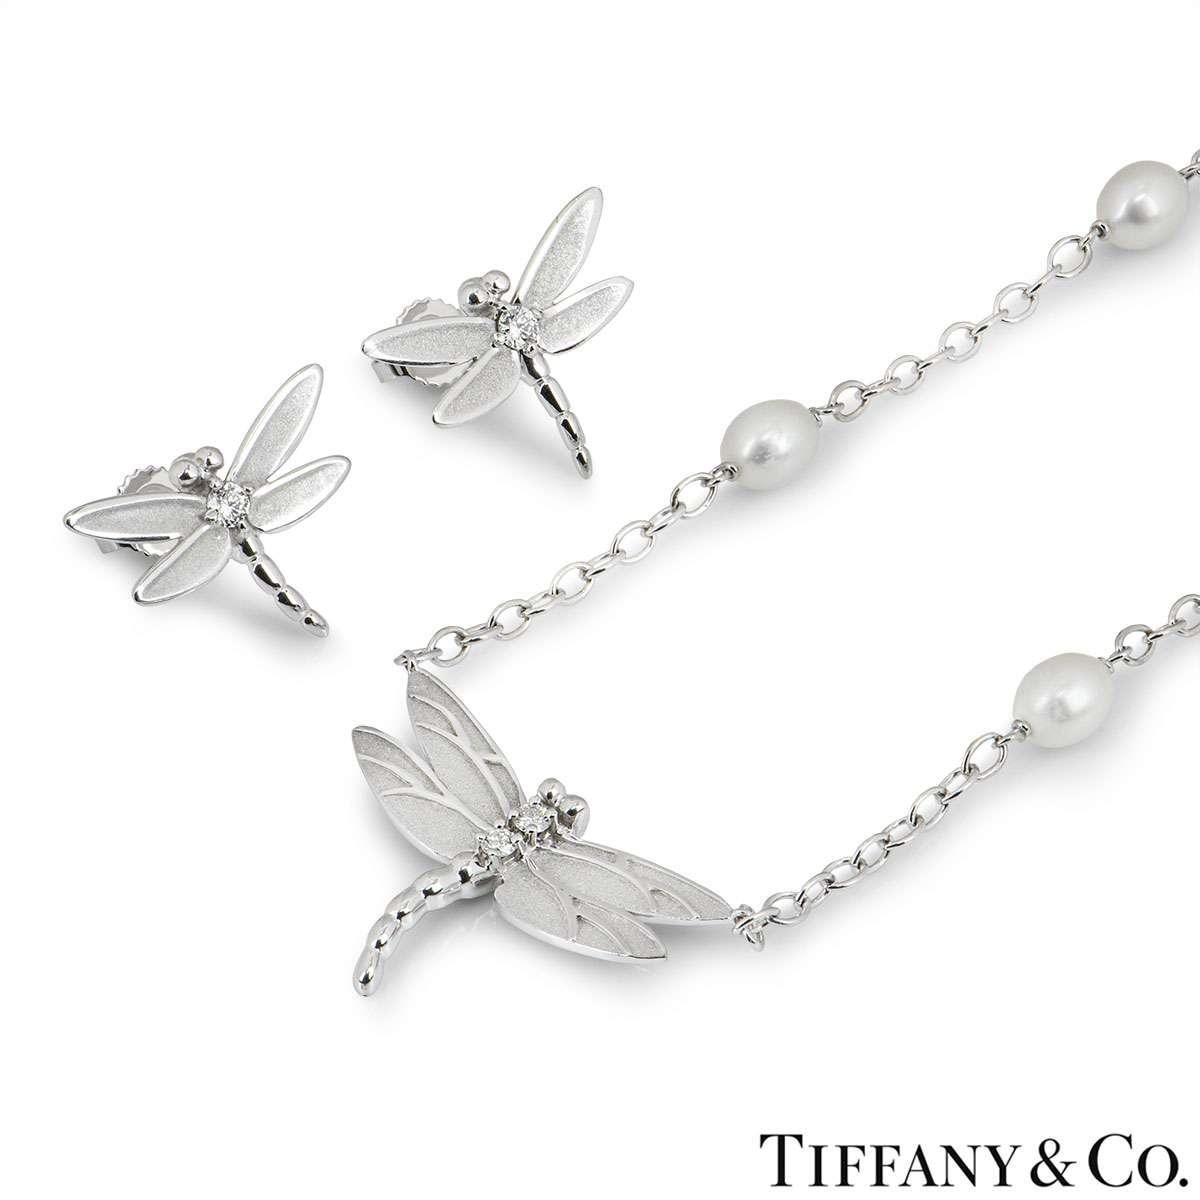 A beautiful necklace and earring suite by Tiffany & Co. The earrings are each set with a single round brilliant cut diamond in the centre of the Dragonfly and feature post and butterfly back fittings. The necklace has two round brilliant cut